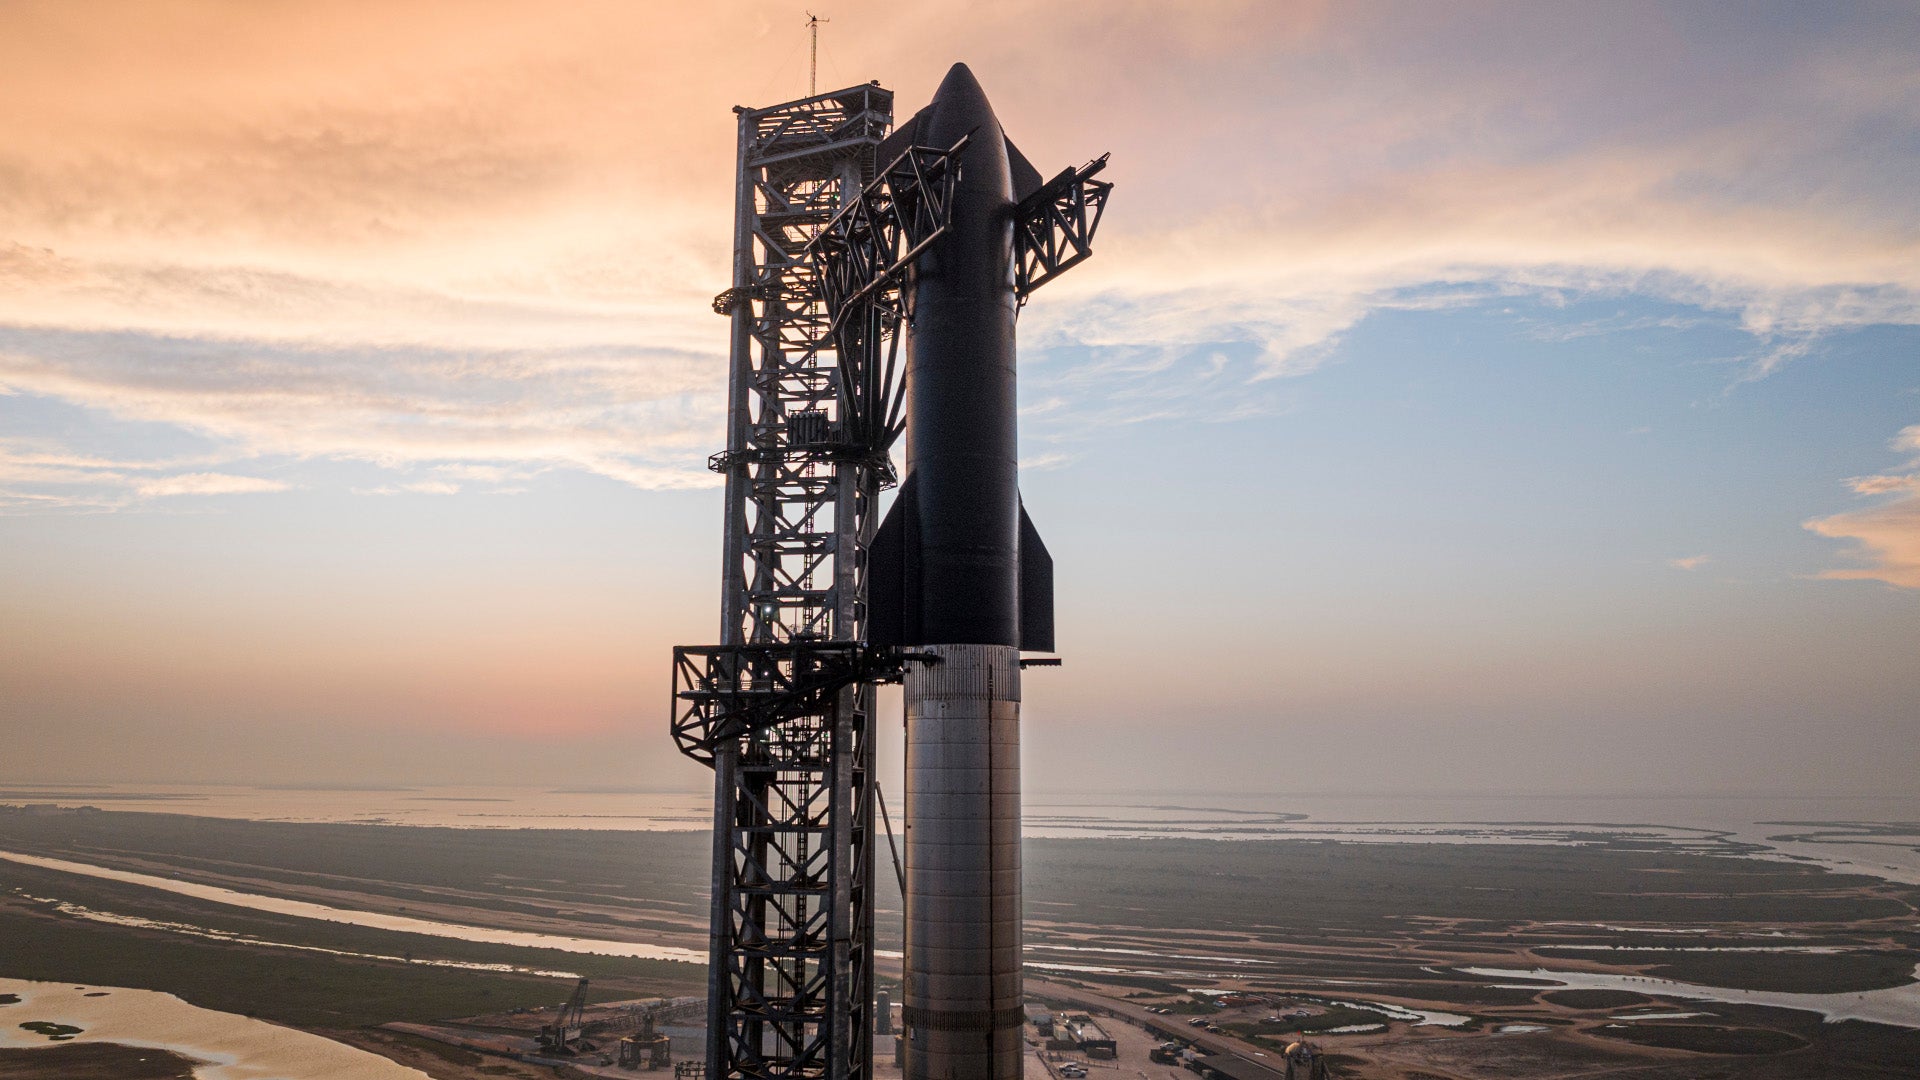 Will the Most Powerful Rocket Ever Built Fly Again This Week?